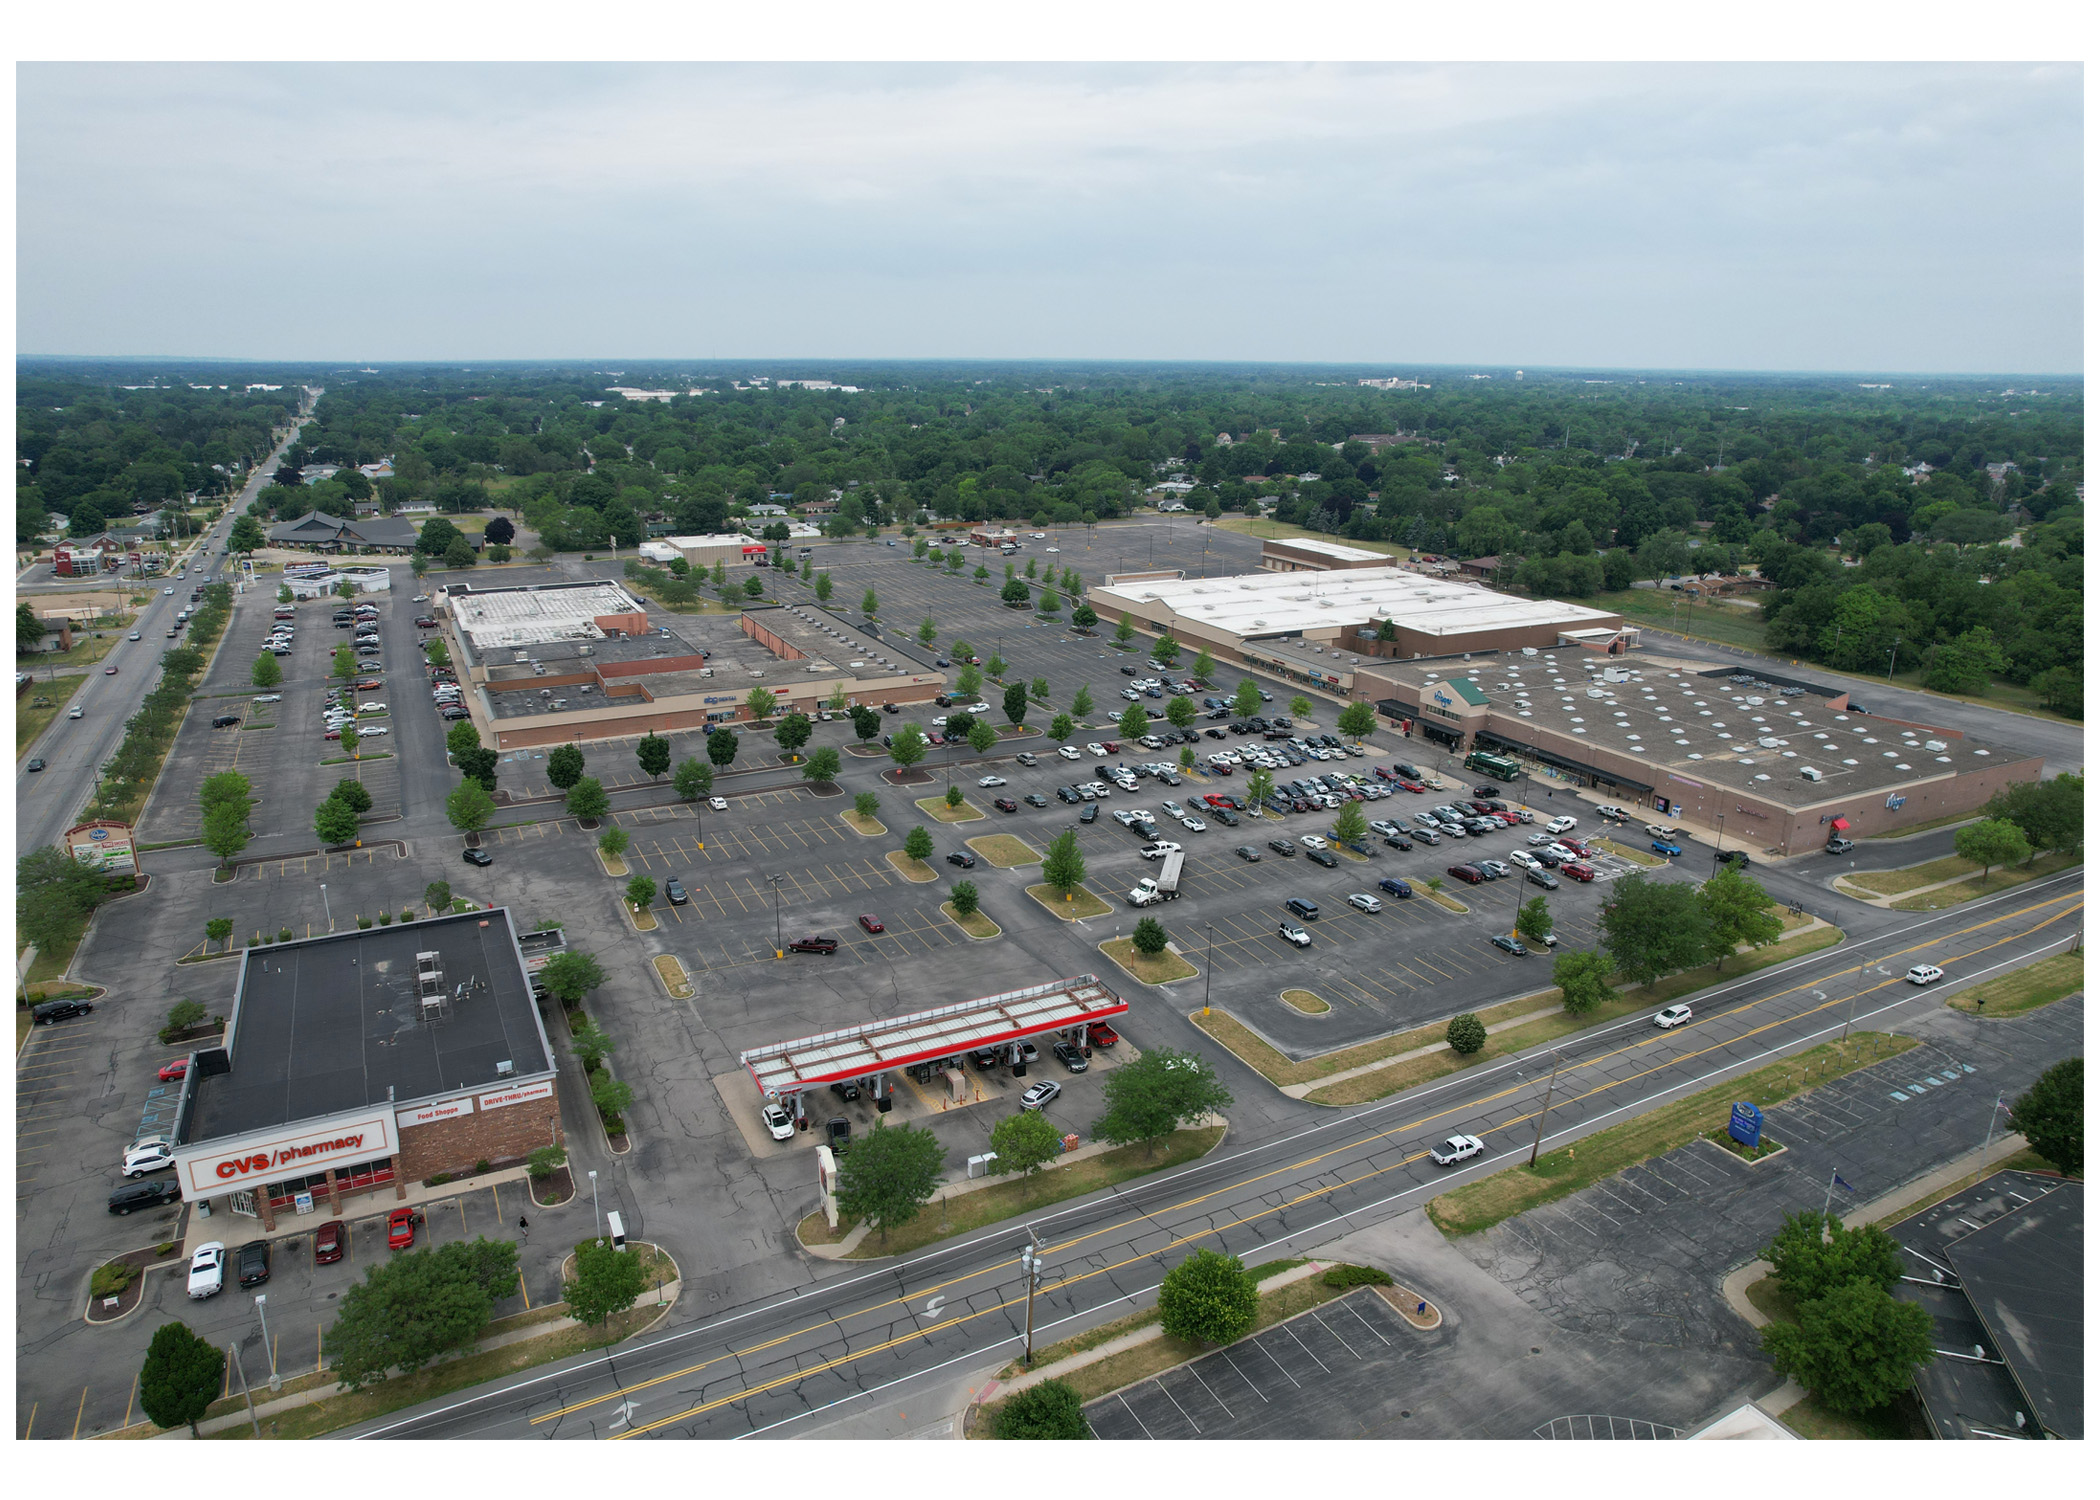 Woodland Crossing aerial view from behind Kroger, full shopping center and parking lot.